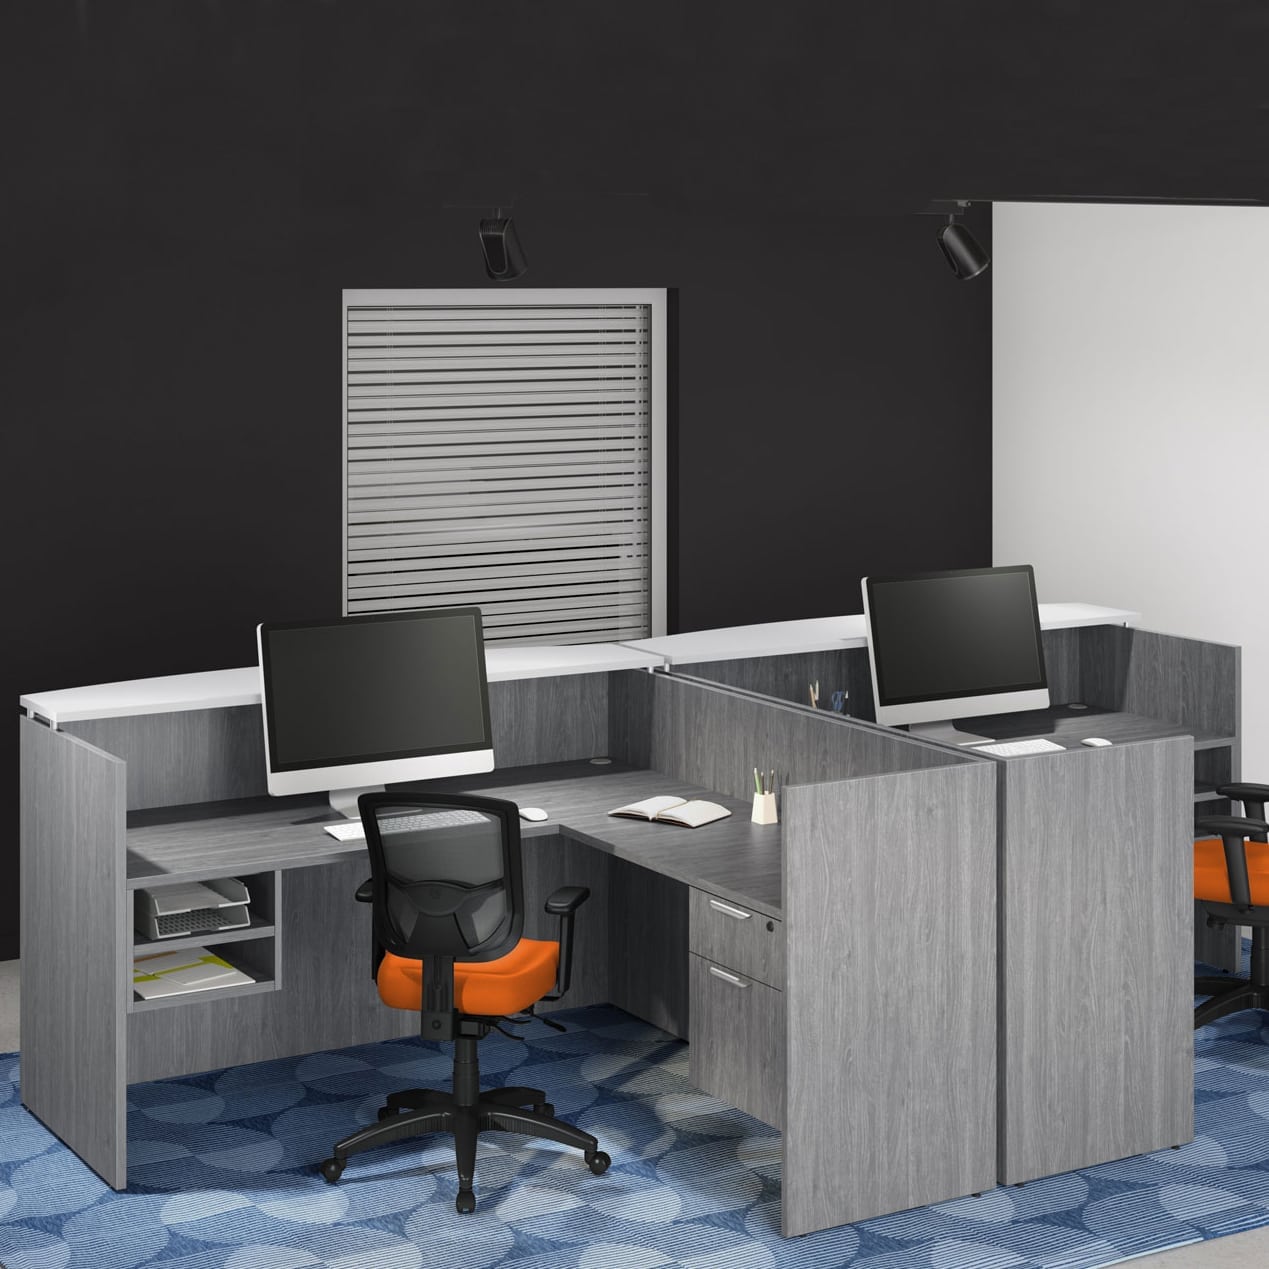 Double Reception Desk Station Affordable Stylish Office